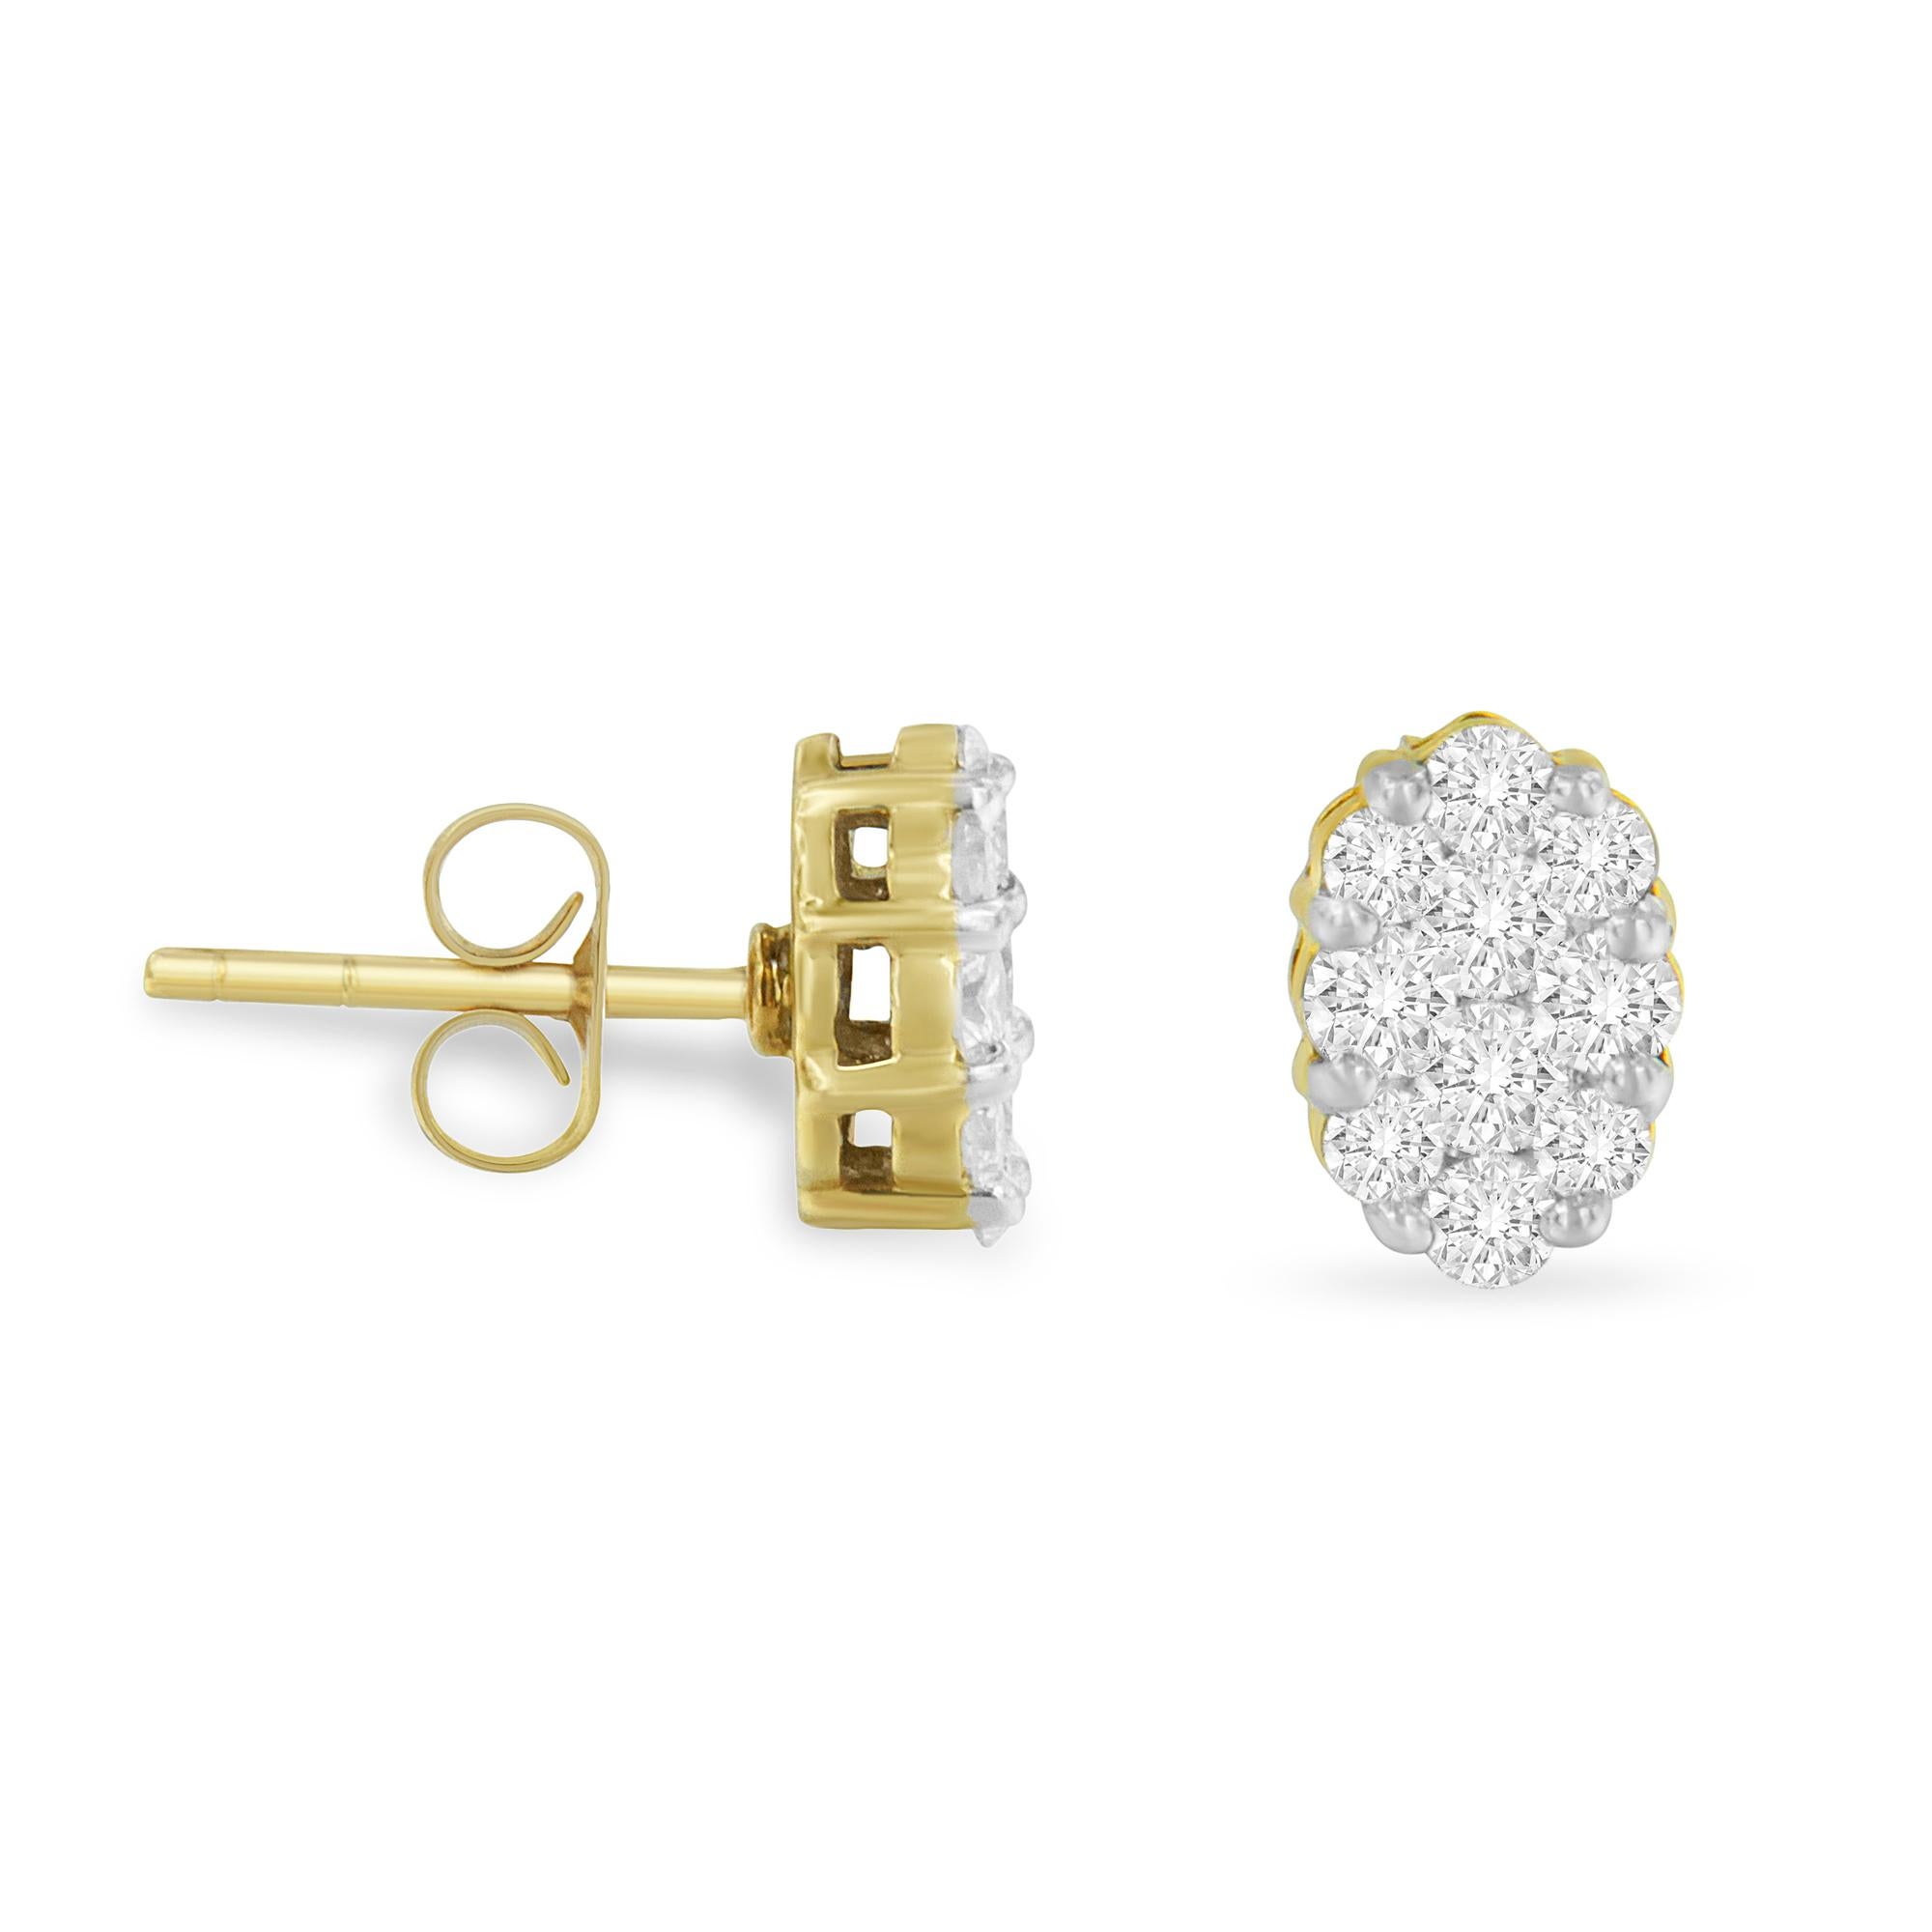 Modern 18K Yellow Gold 1.0 Carat Floral Cluster Diamond Stud Earrings For Sale